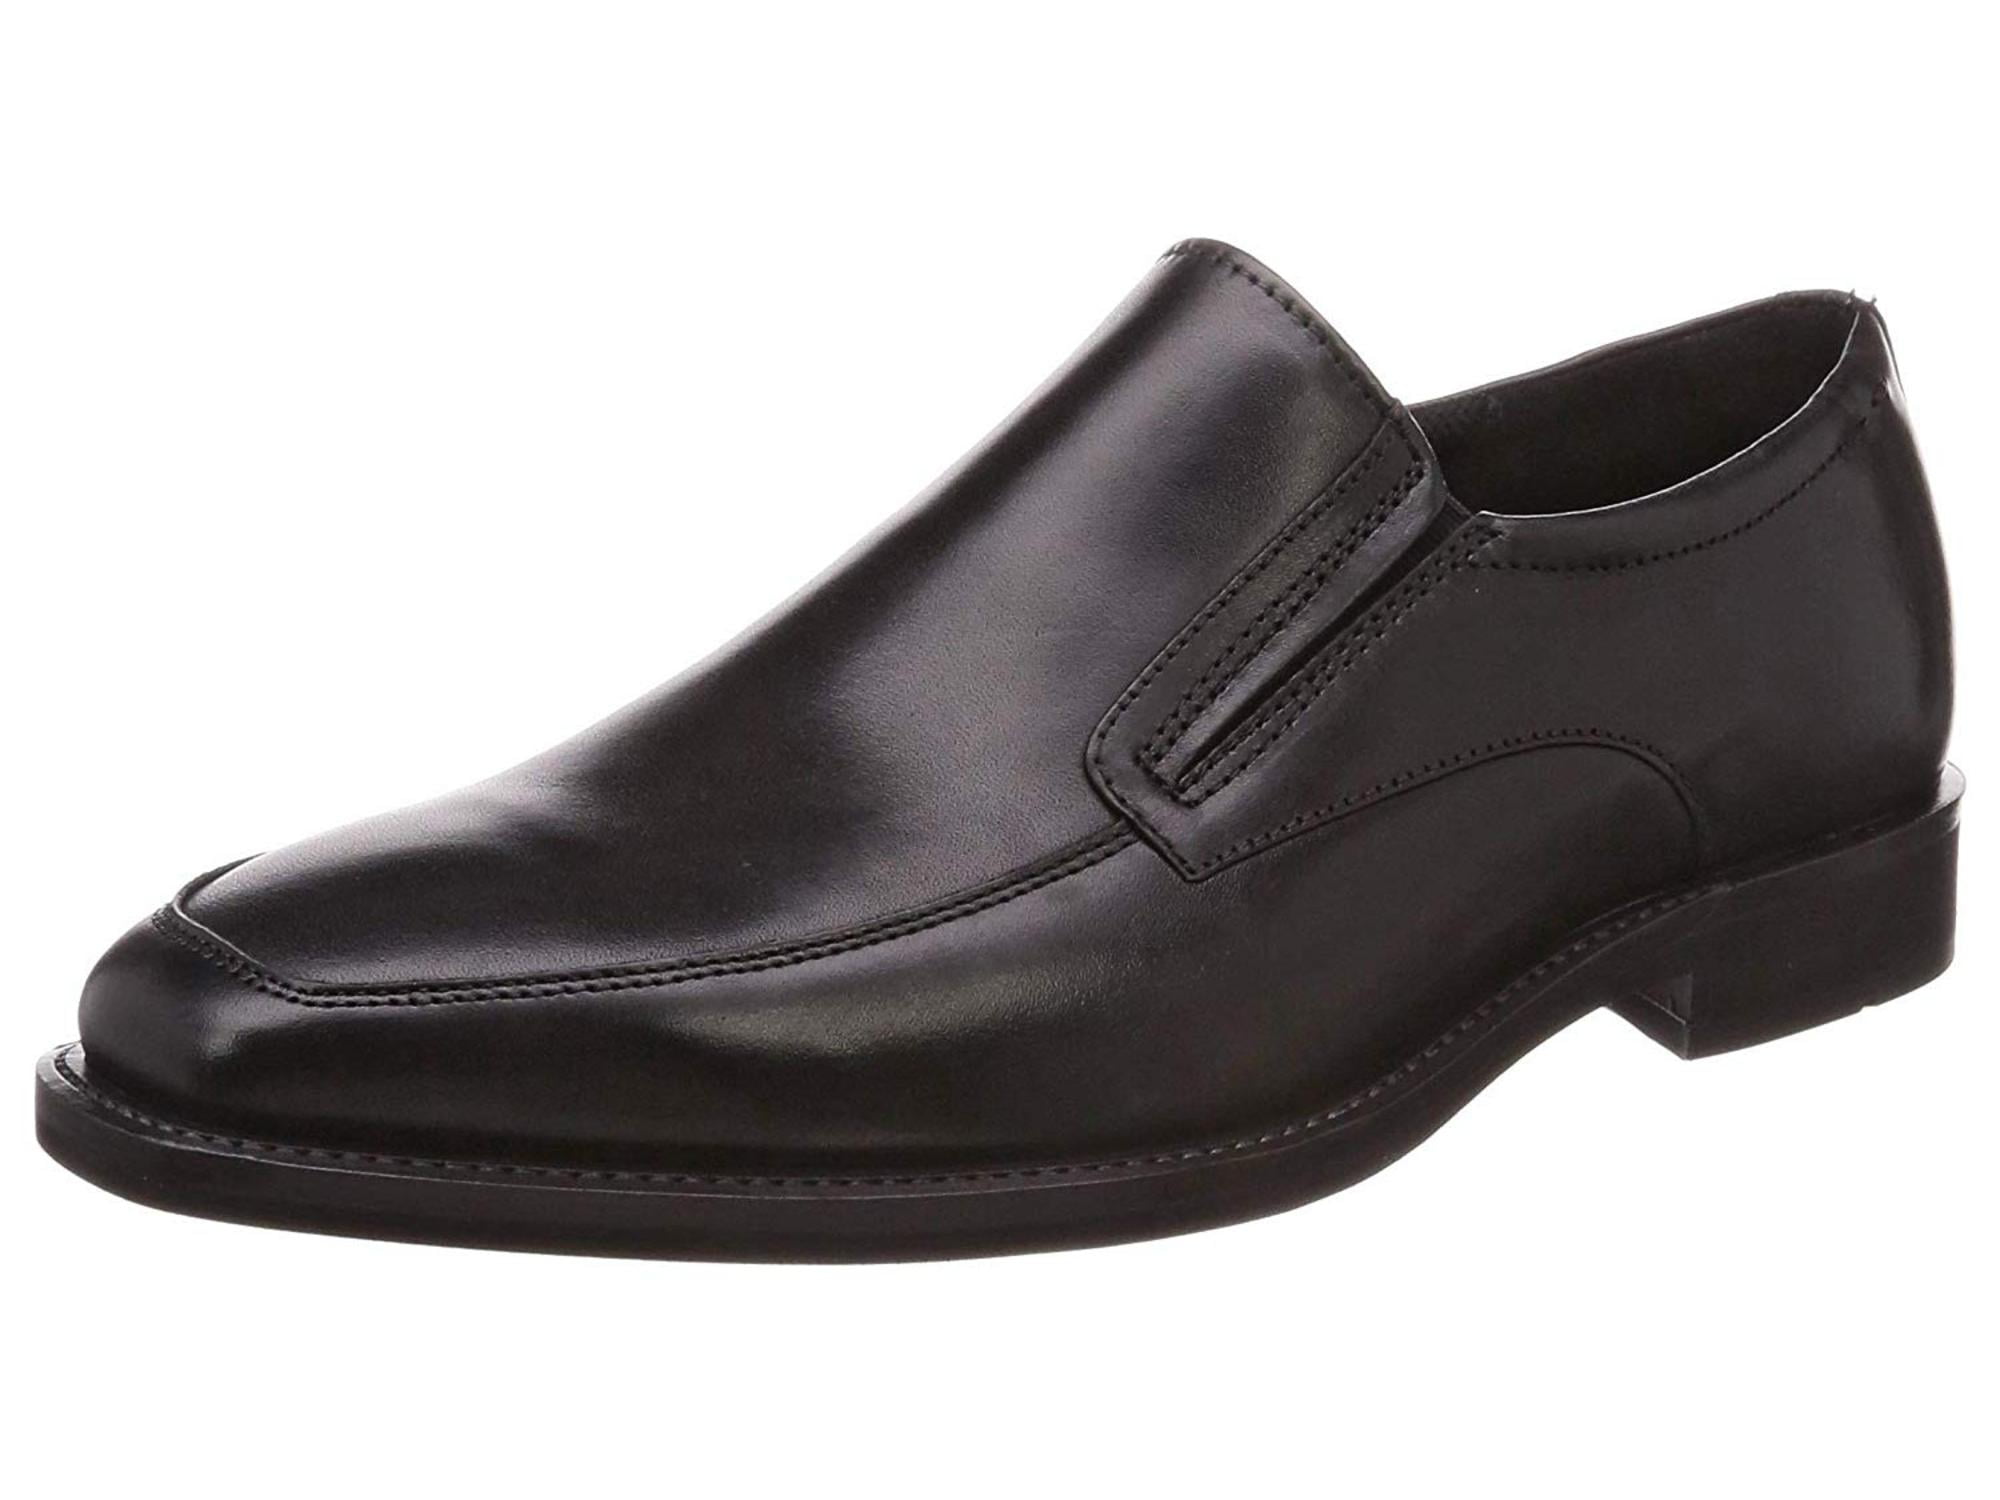 ecco mens loafer shoes